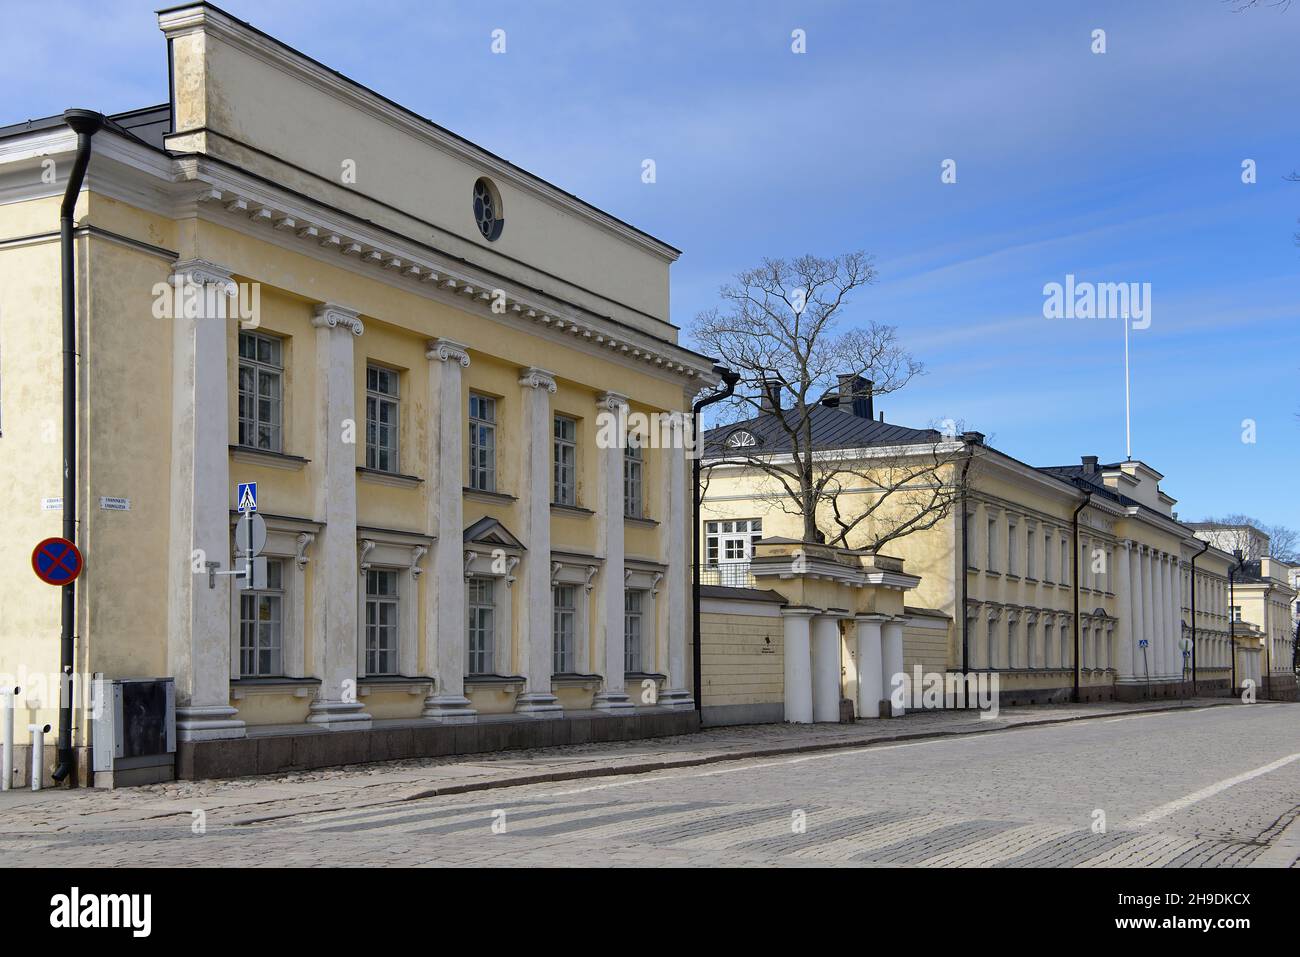 Helsinki, Finland – March 31, 2021: classical style buildings in Helsinki, University of Helsinki building Stock Photo